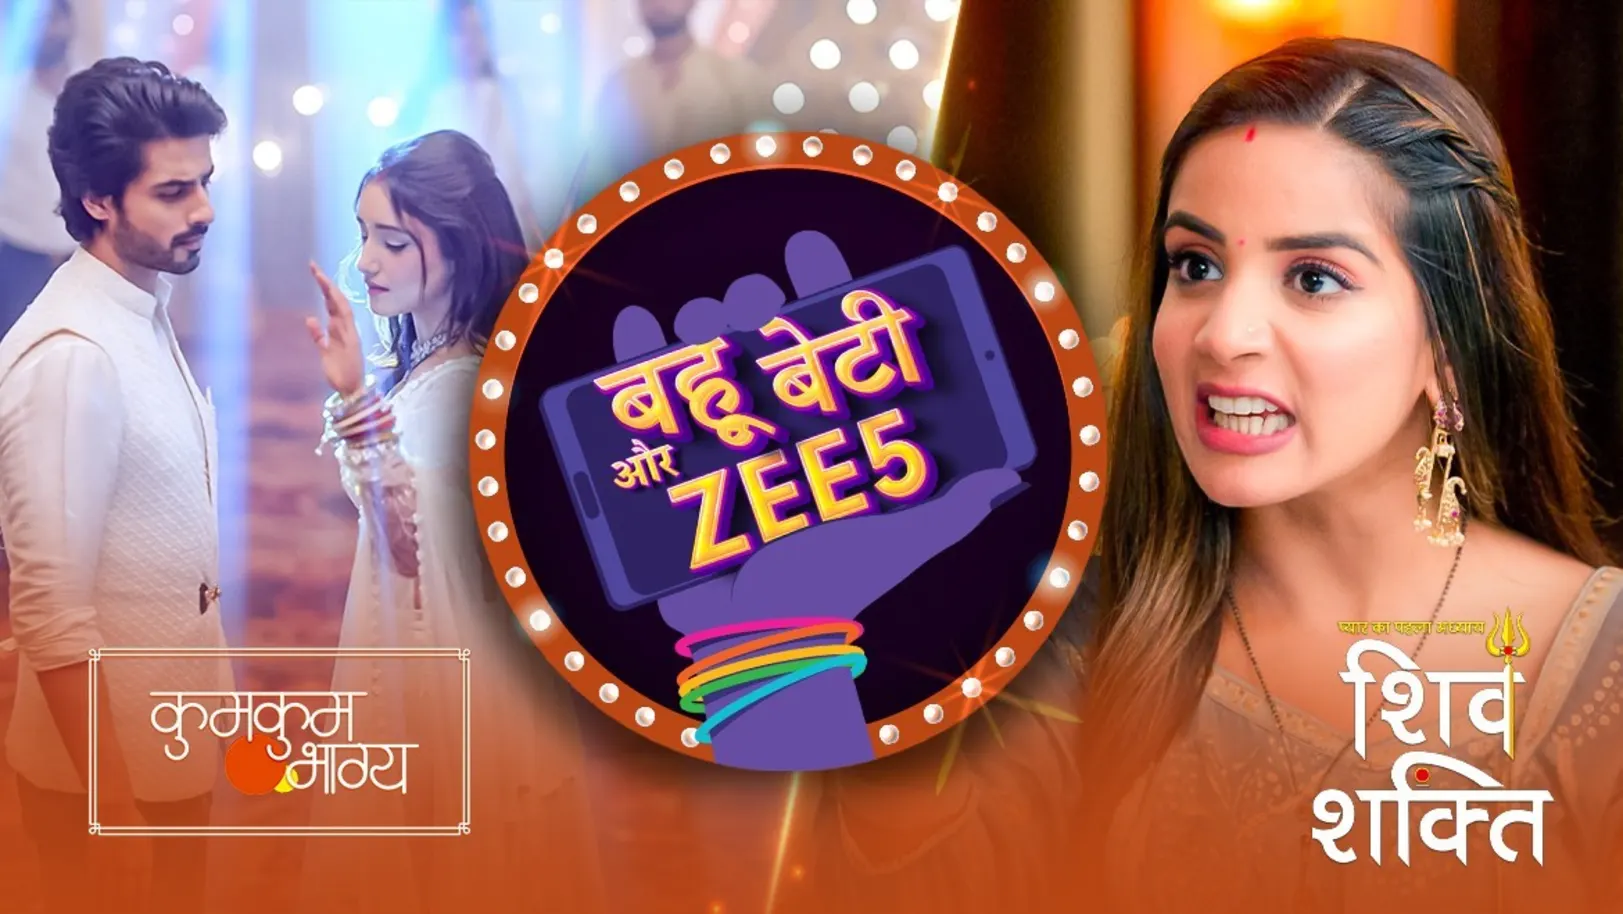 Captivating Turns in the Shows | Bahu Beti Aur ZEE5 Episode 11